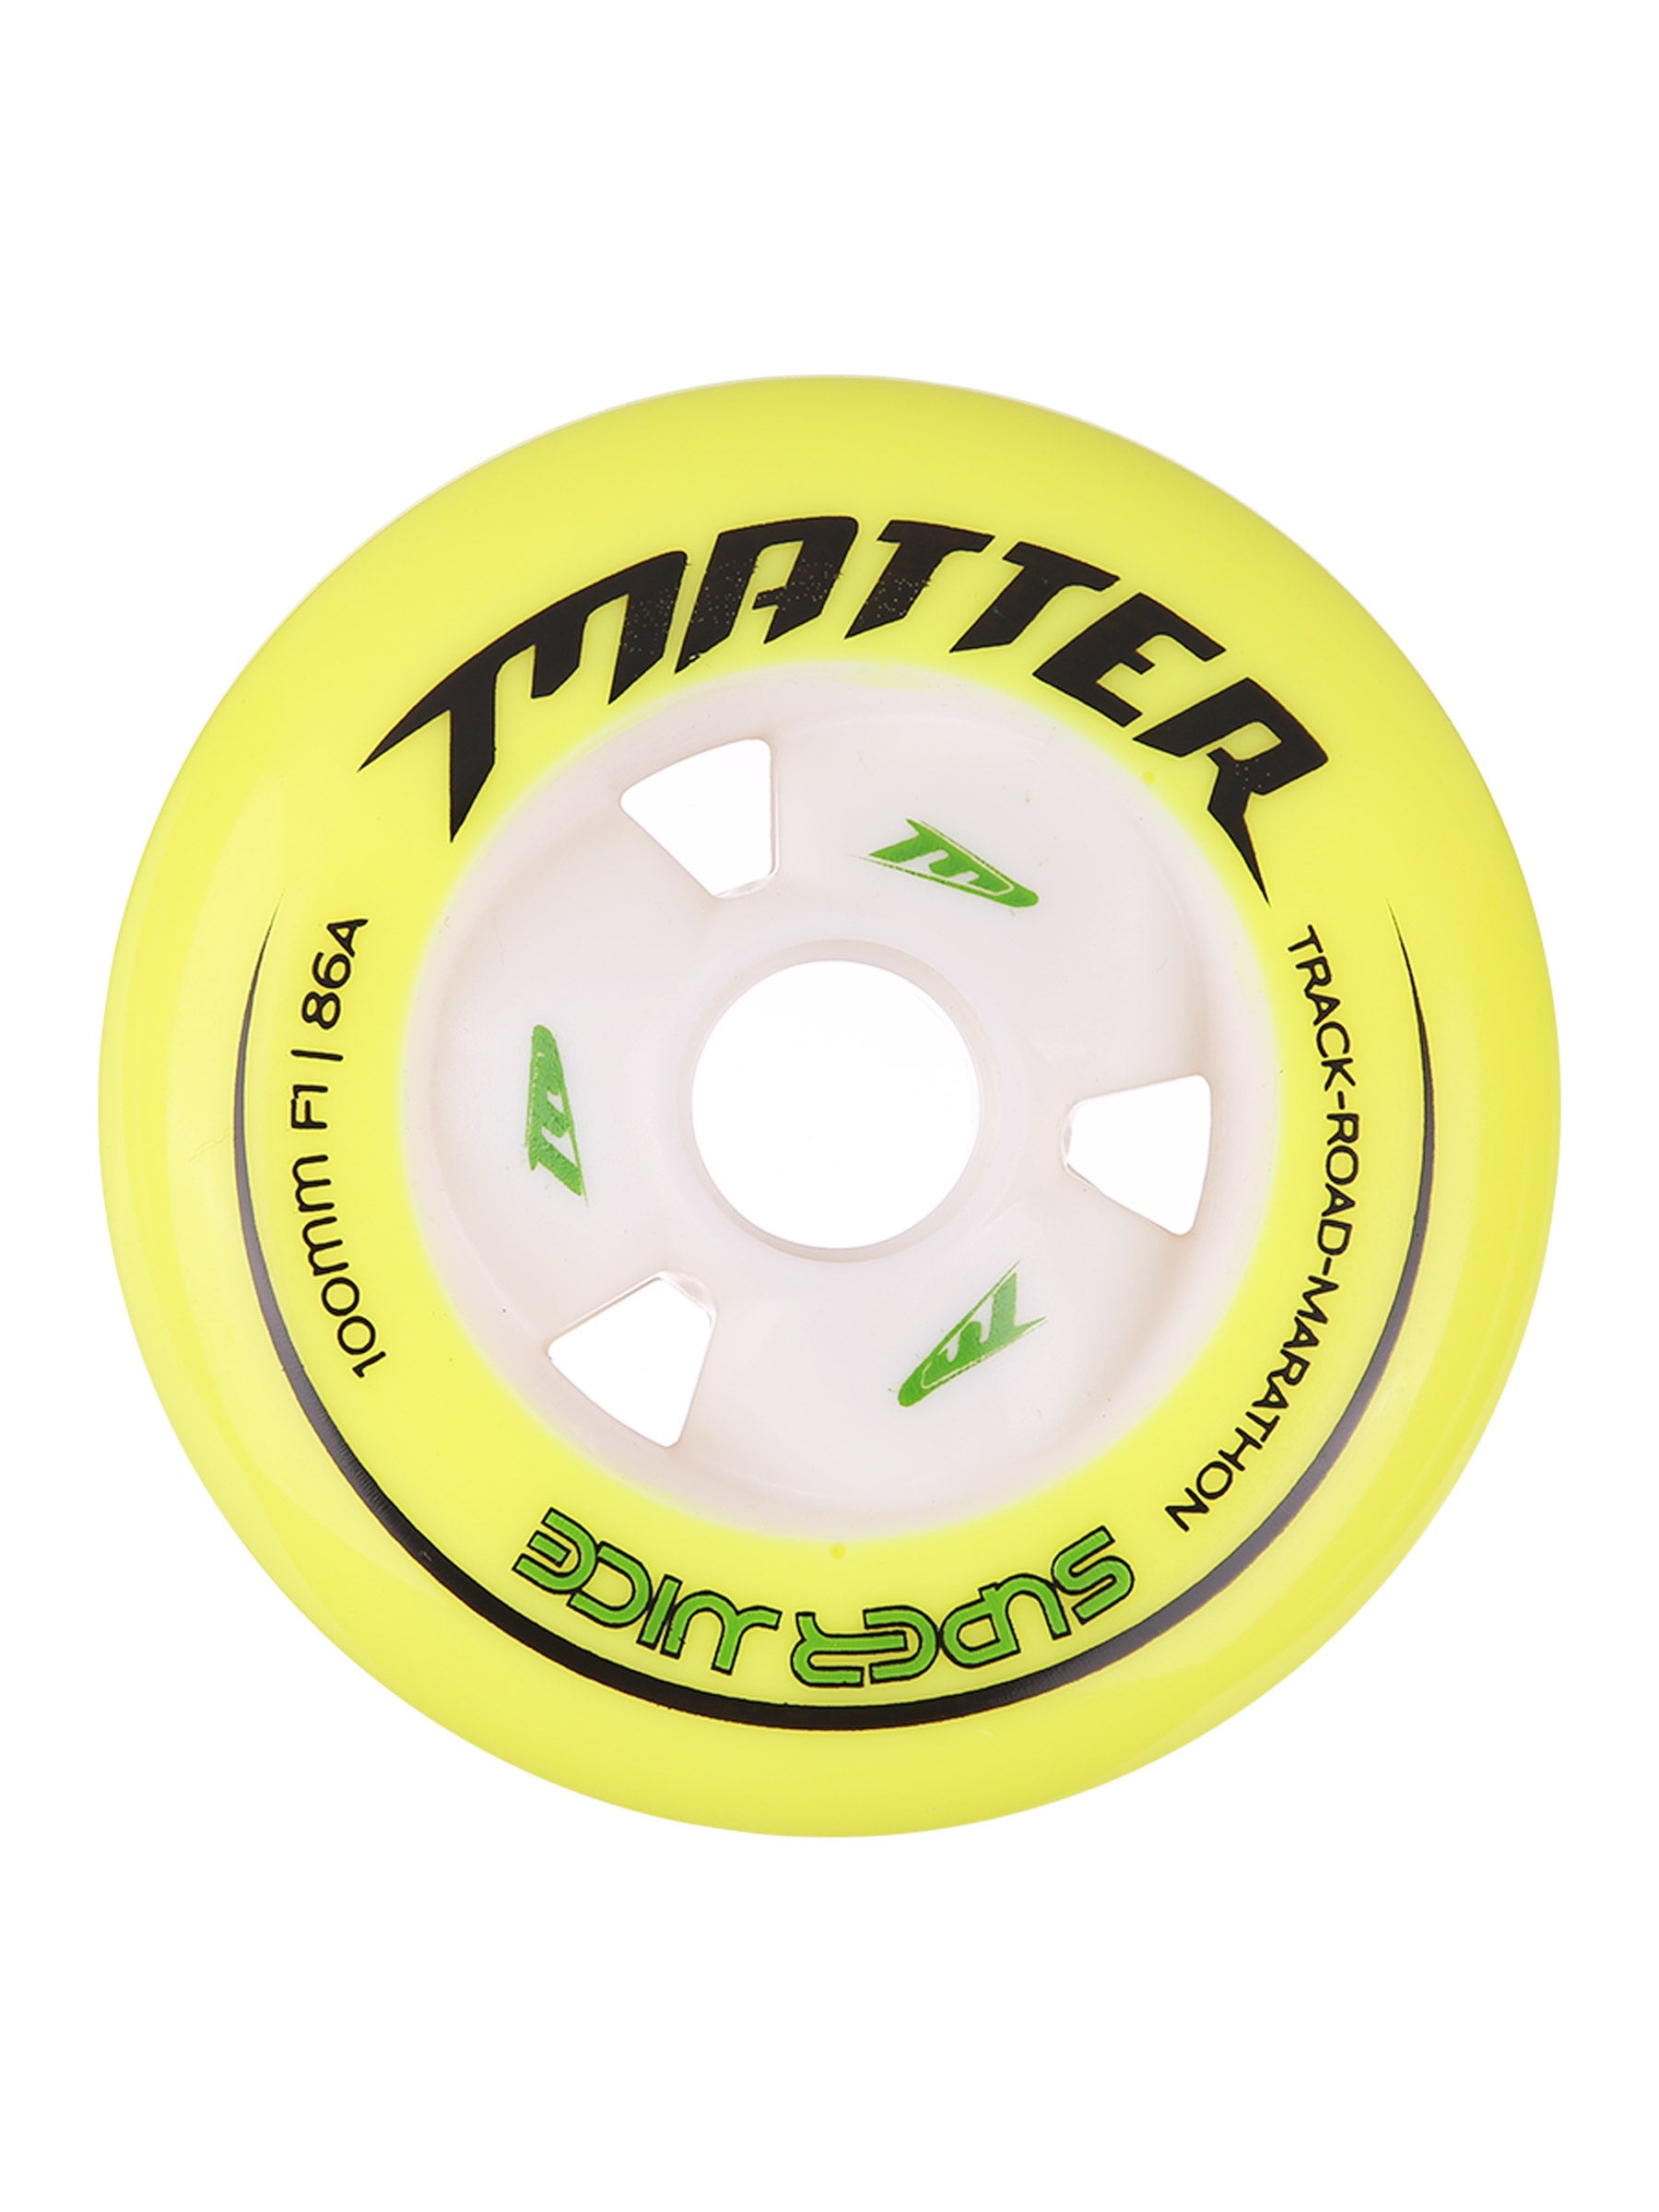 Matter One20five NEW! 125 mm F0 inline skating wheels...set of 6 